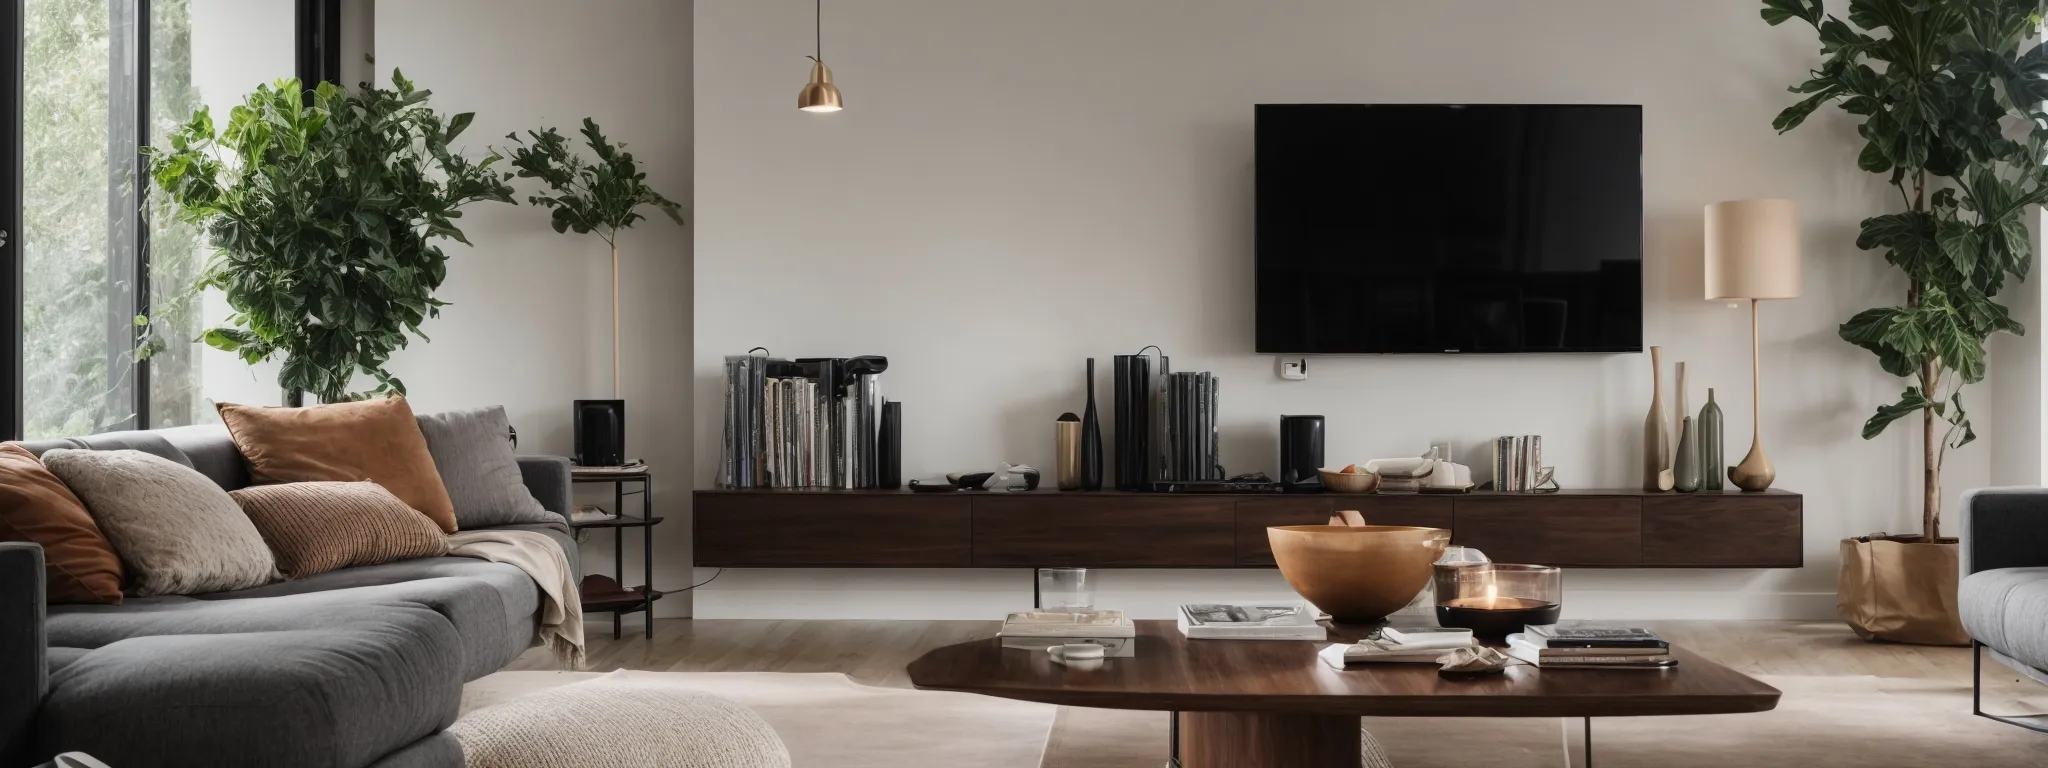 a modern living room with an idle smart tv screen amidst comfortable furnishings.